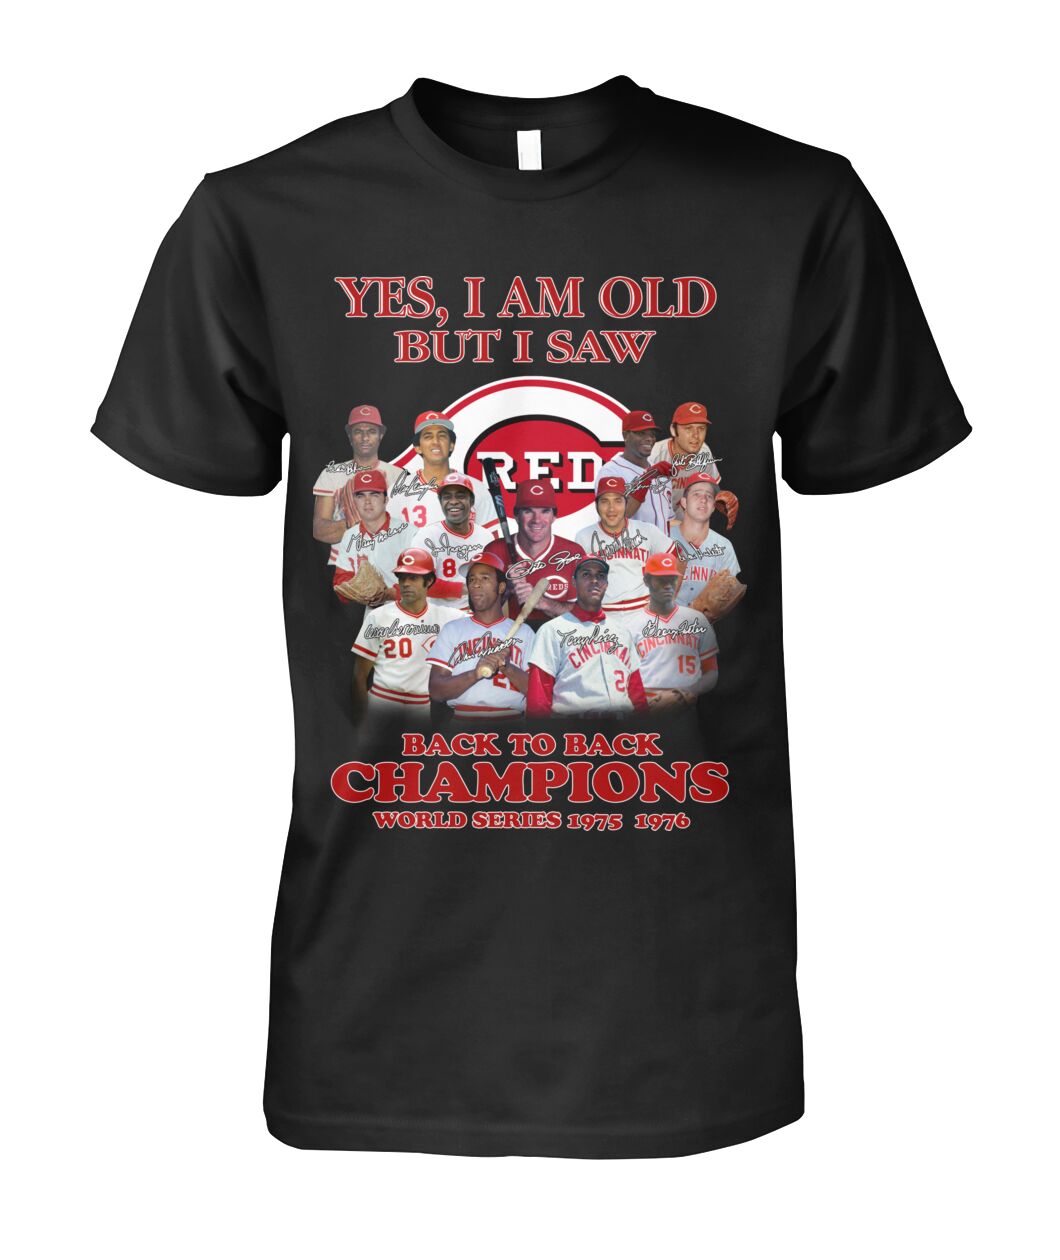 Yes I am old but I saw Cincinnati Reds MLB back to back world champions world series 1975 1976 shirt